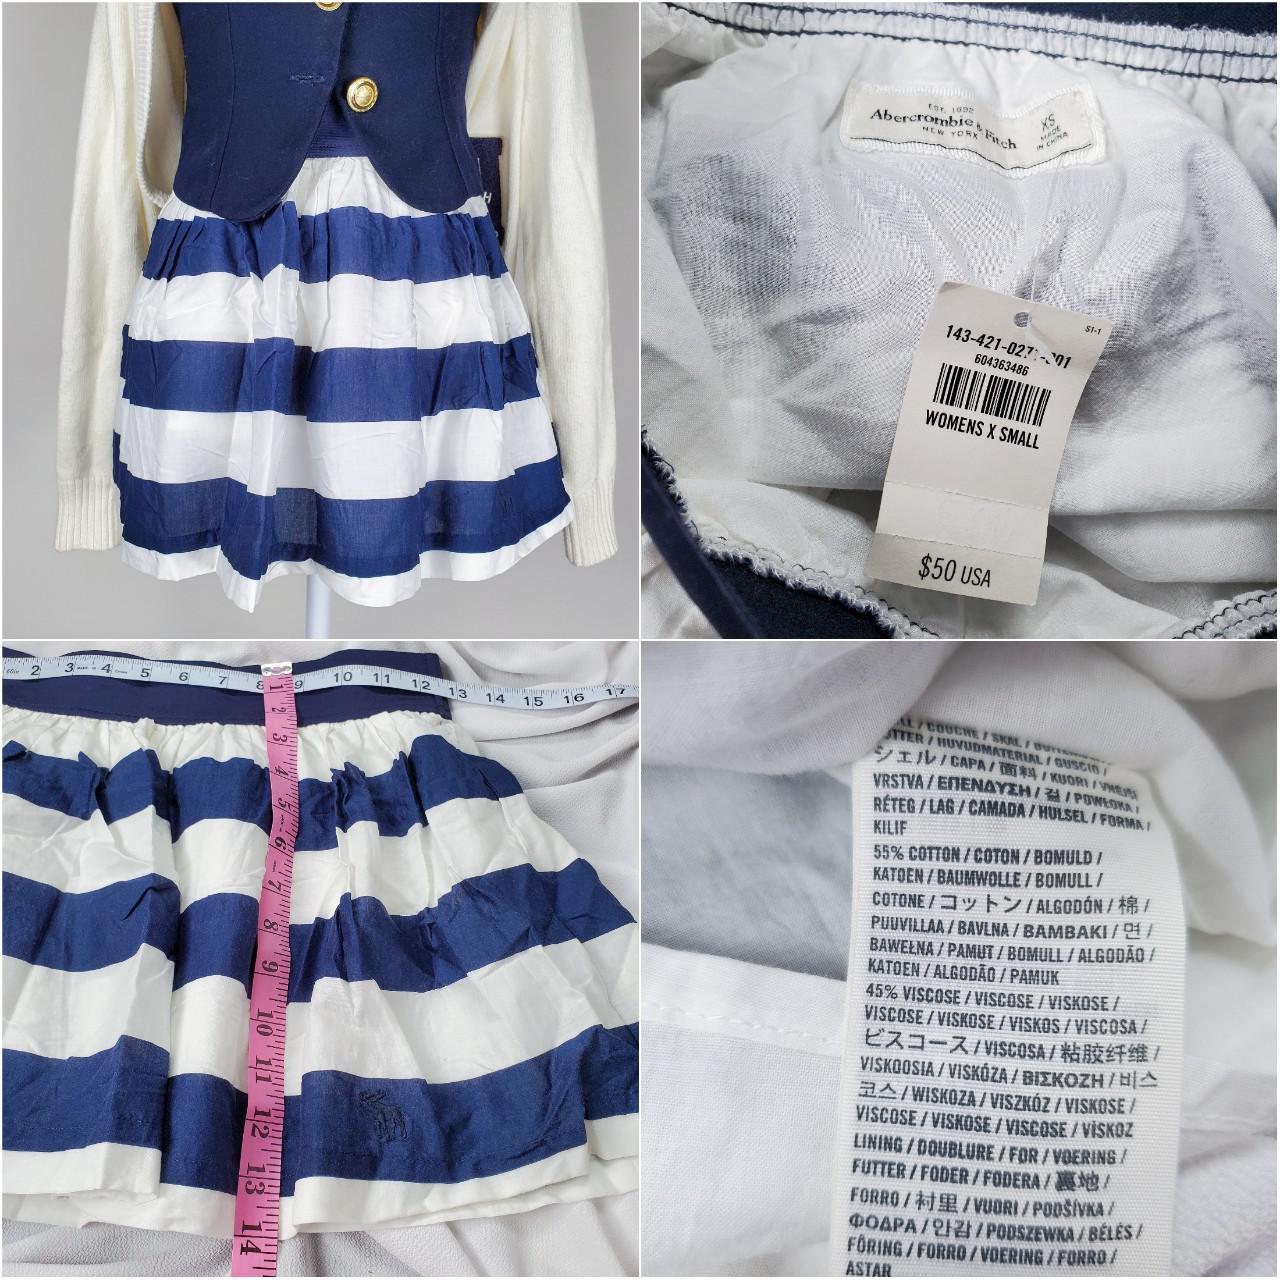 Abercrombie & Fitch Women's Navy and White Skirt (4)